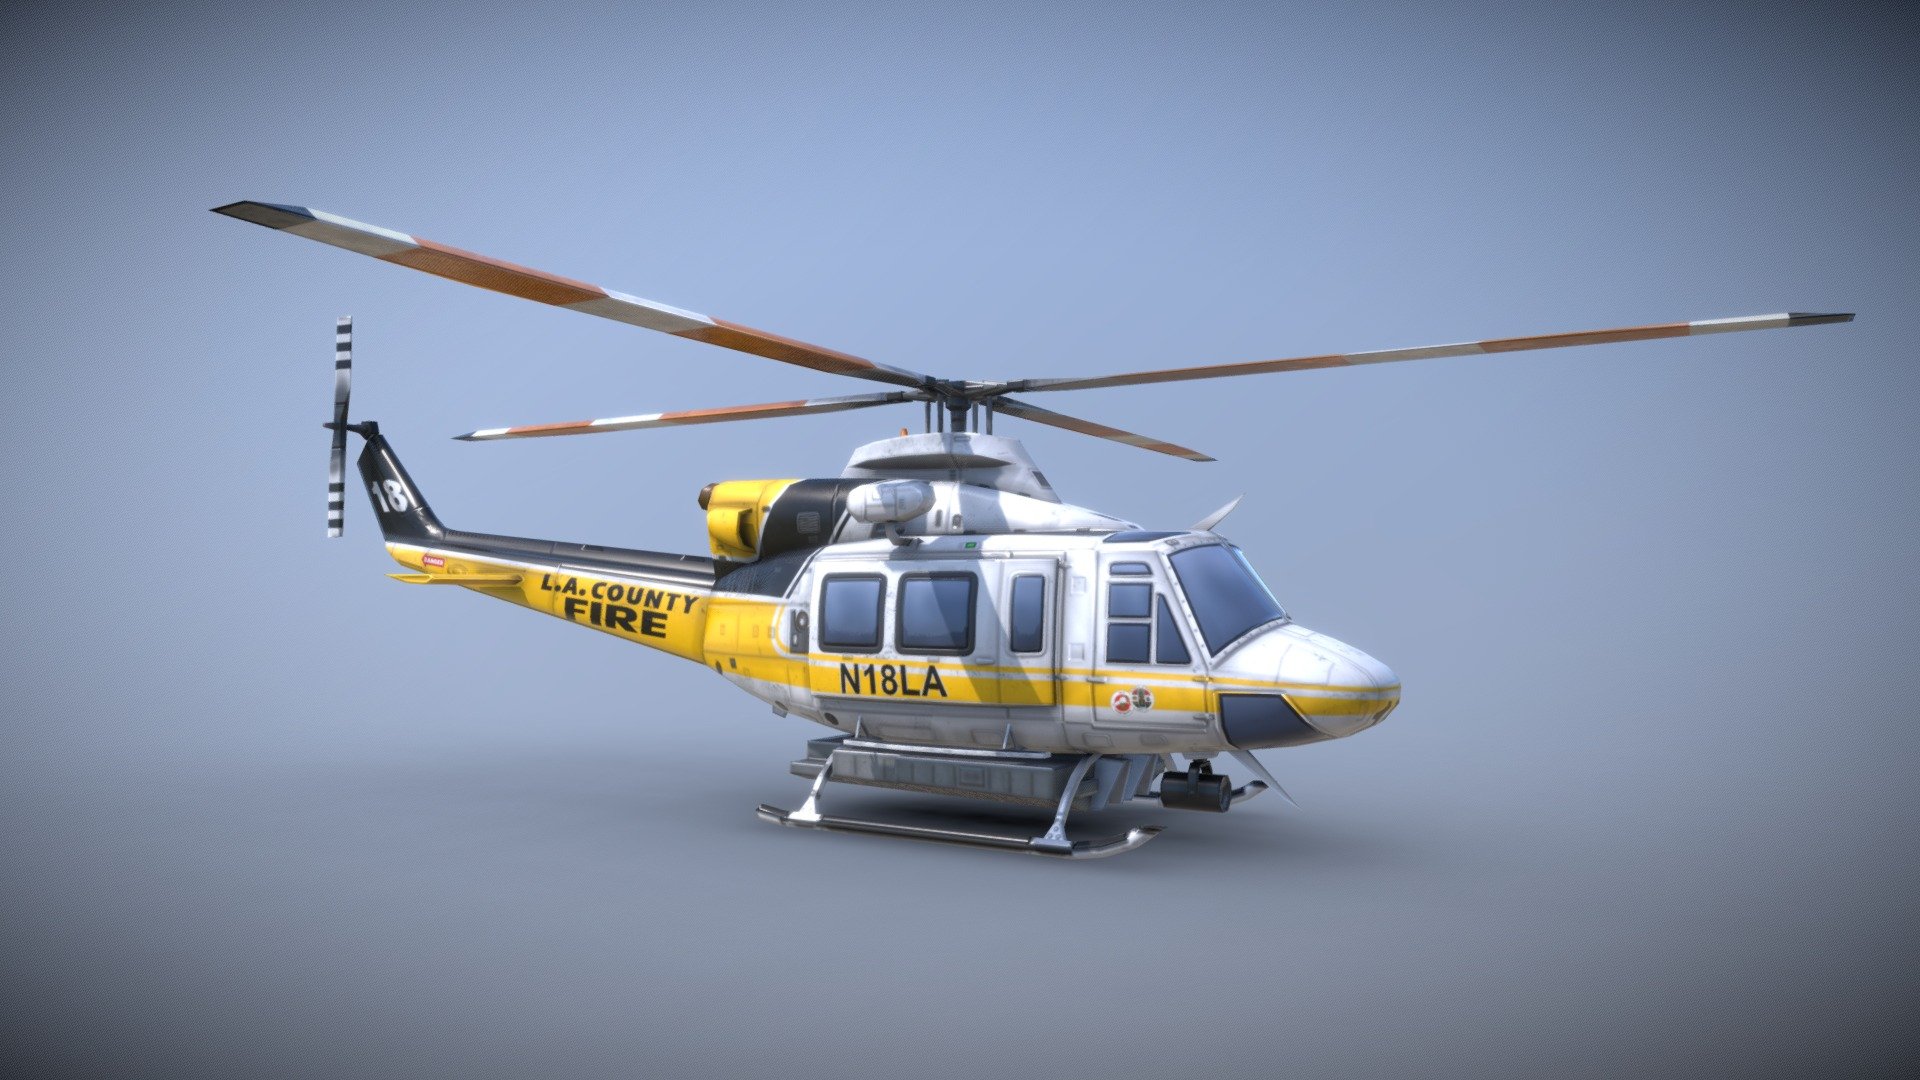 BELL 412 
L.A. COUNTY FIRE
Low-Poly model for the game and VFX

Want to buy a model? Write to DBrepair@yandex.ru - BELL 412 L.A. COUNTY FIRE - 3D model by TSB3DMODELS 3d model